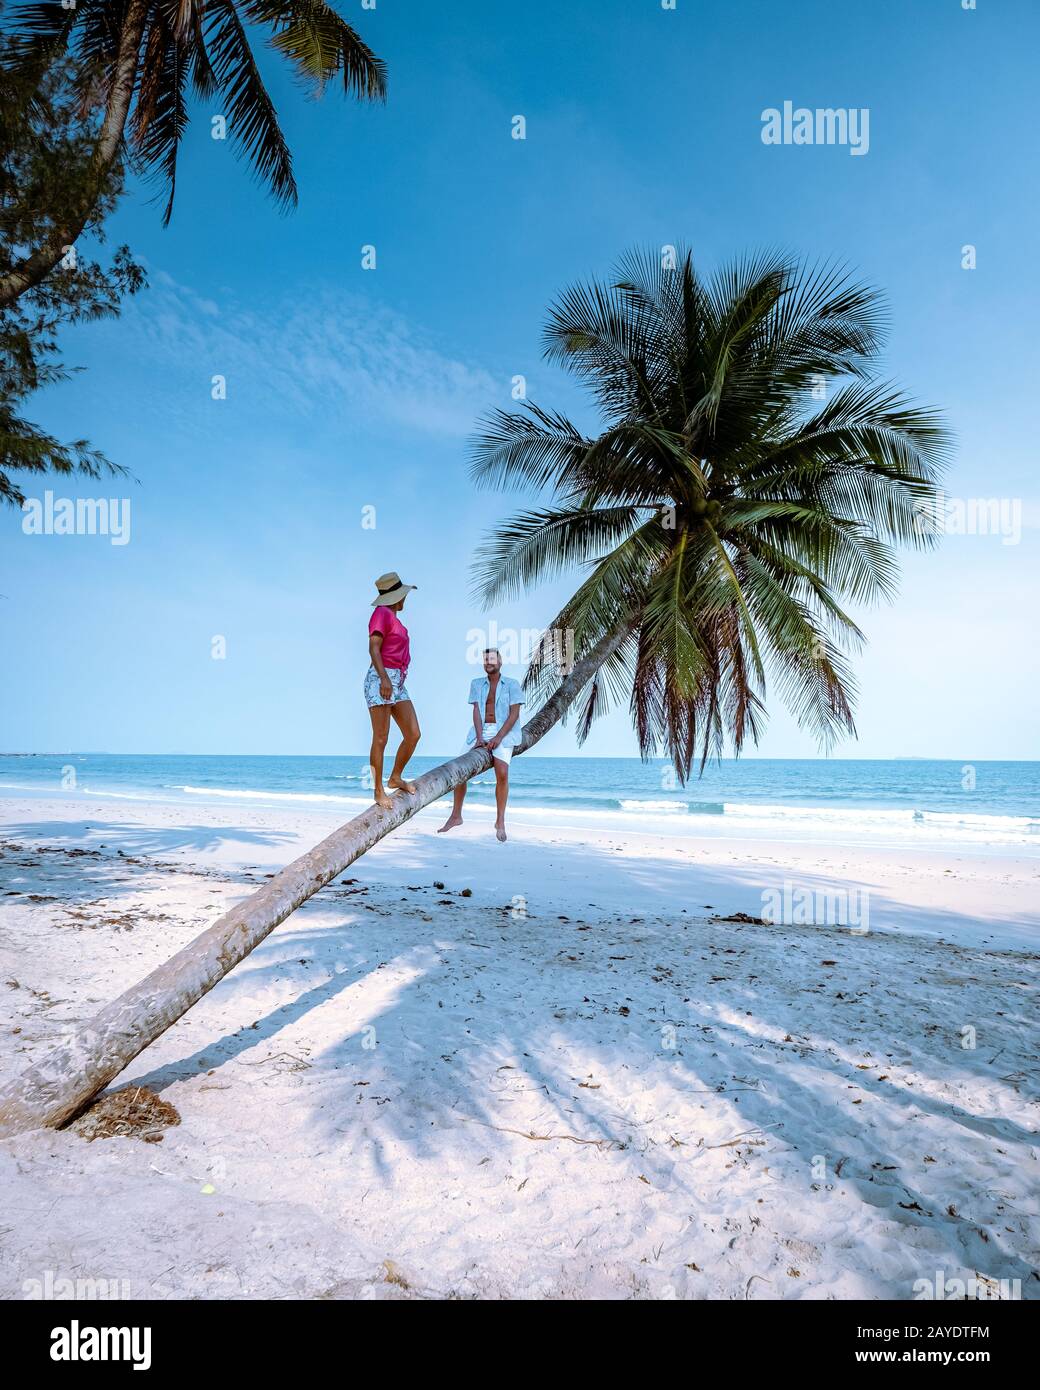 Wua Laen beach Chumphon area Thailand, palm tree hanging over the beach with couple on vacation in Thailand Asia Stock Photo